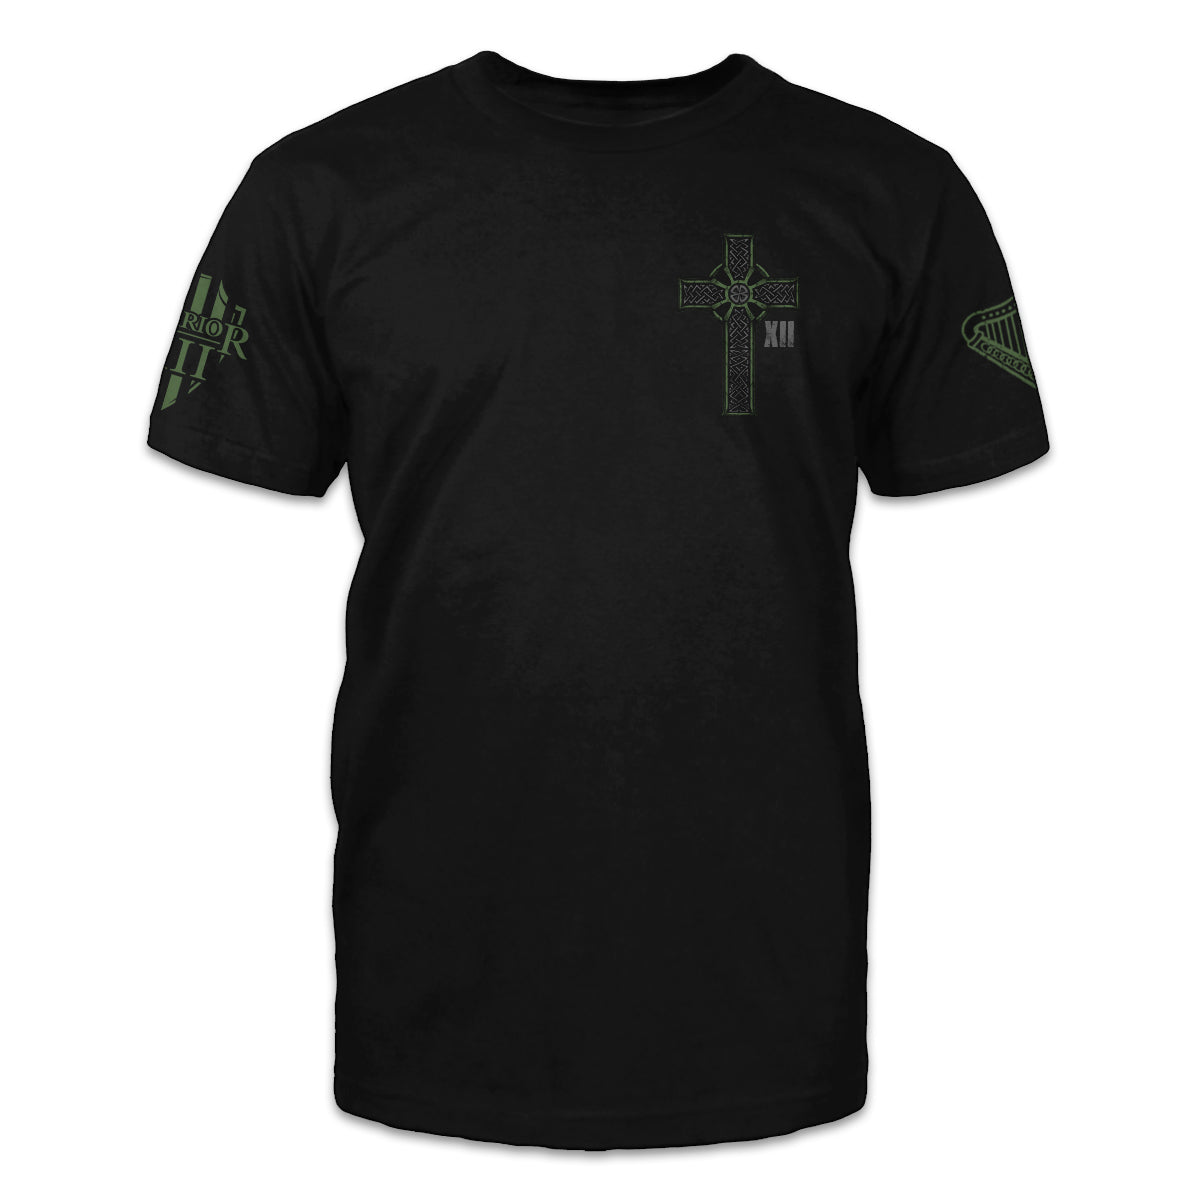 A black t-shirt with an Irish cross printed on the front of the shirt,